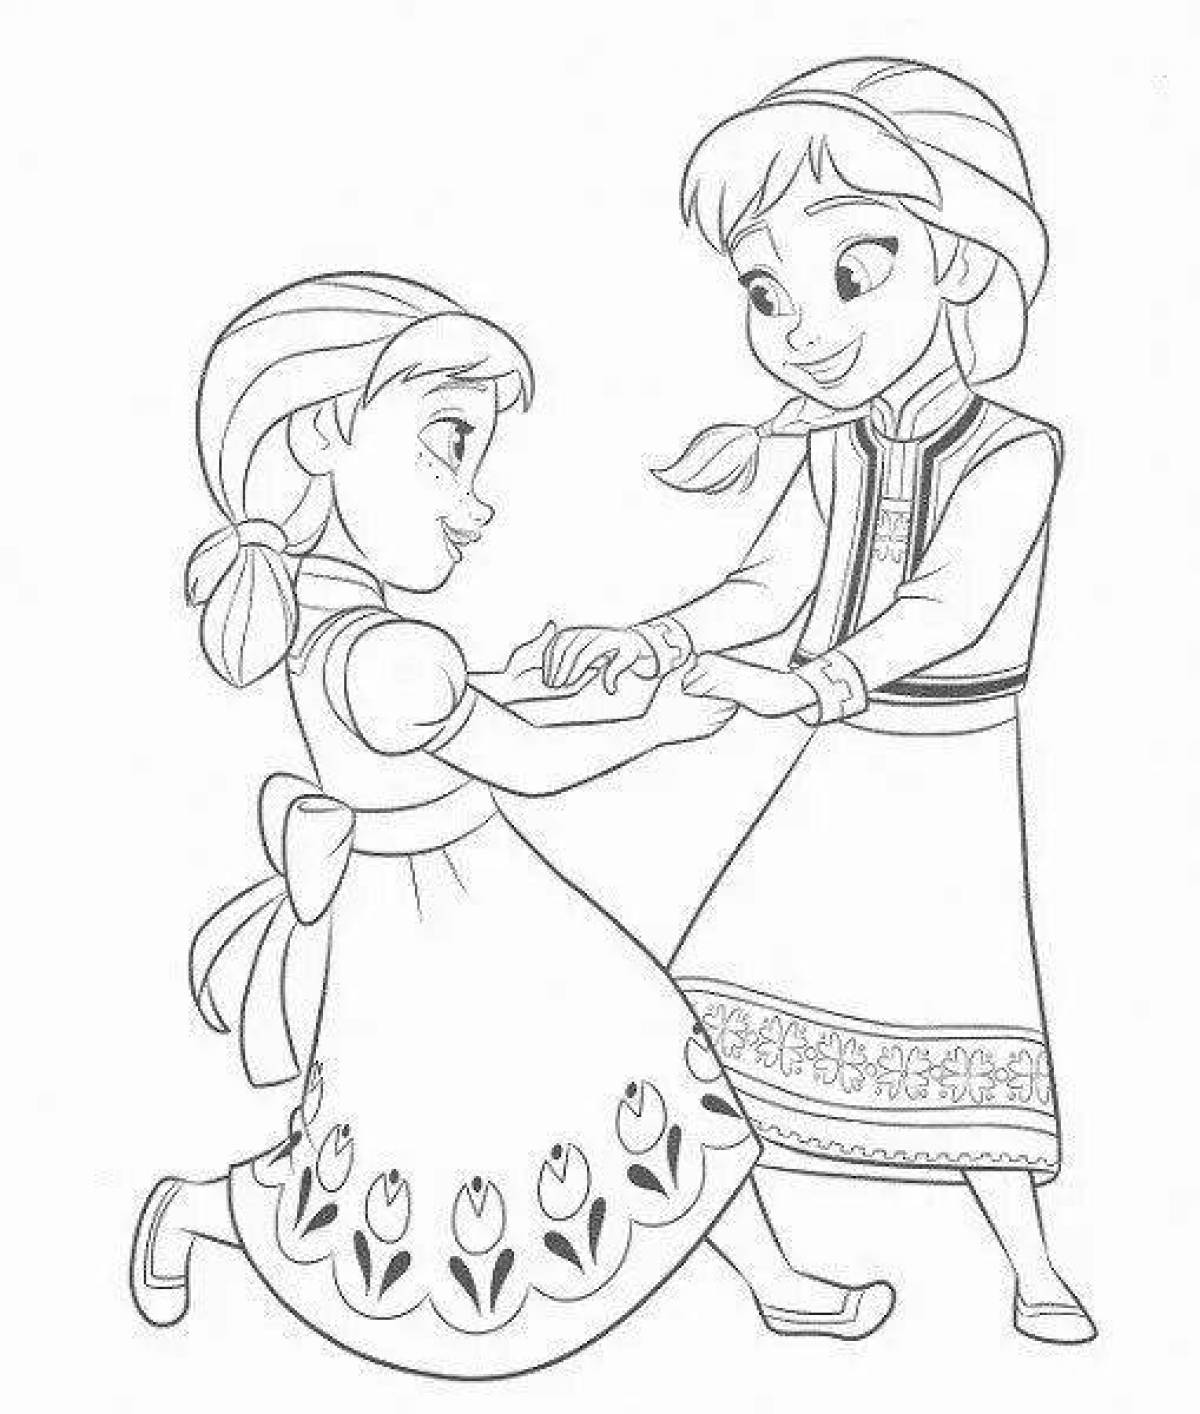 Elsa little animated coloring book